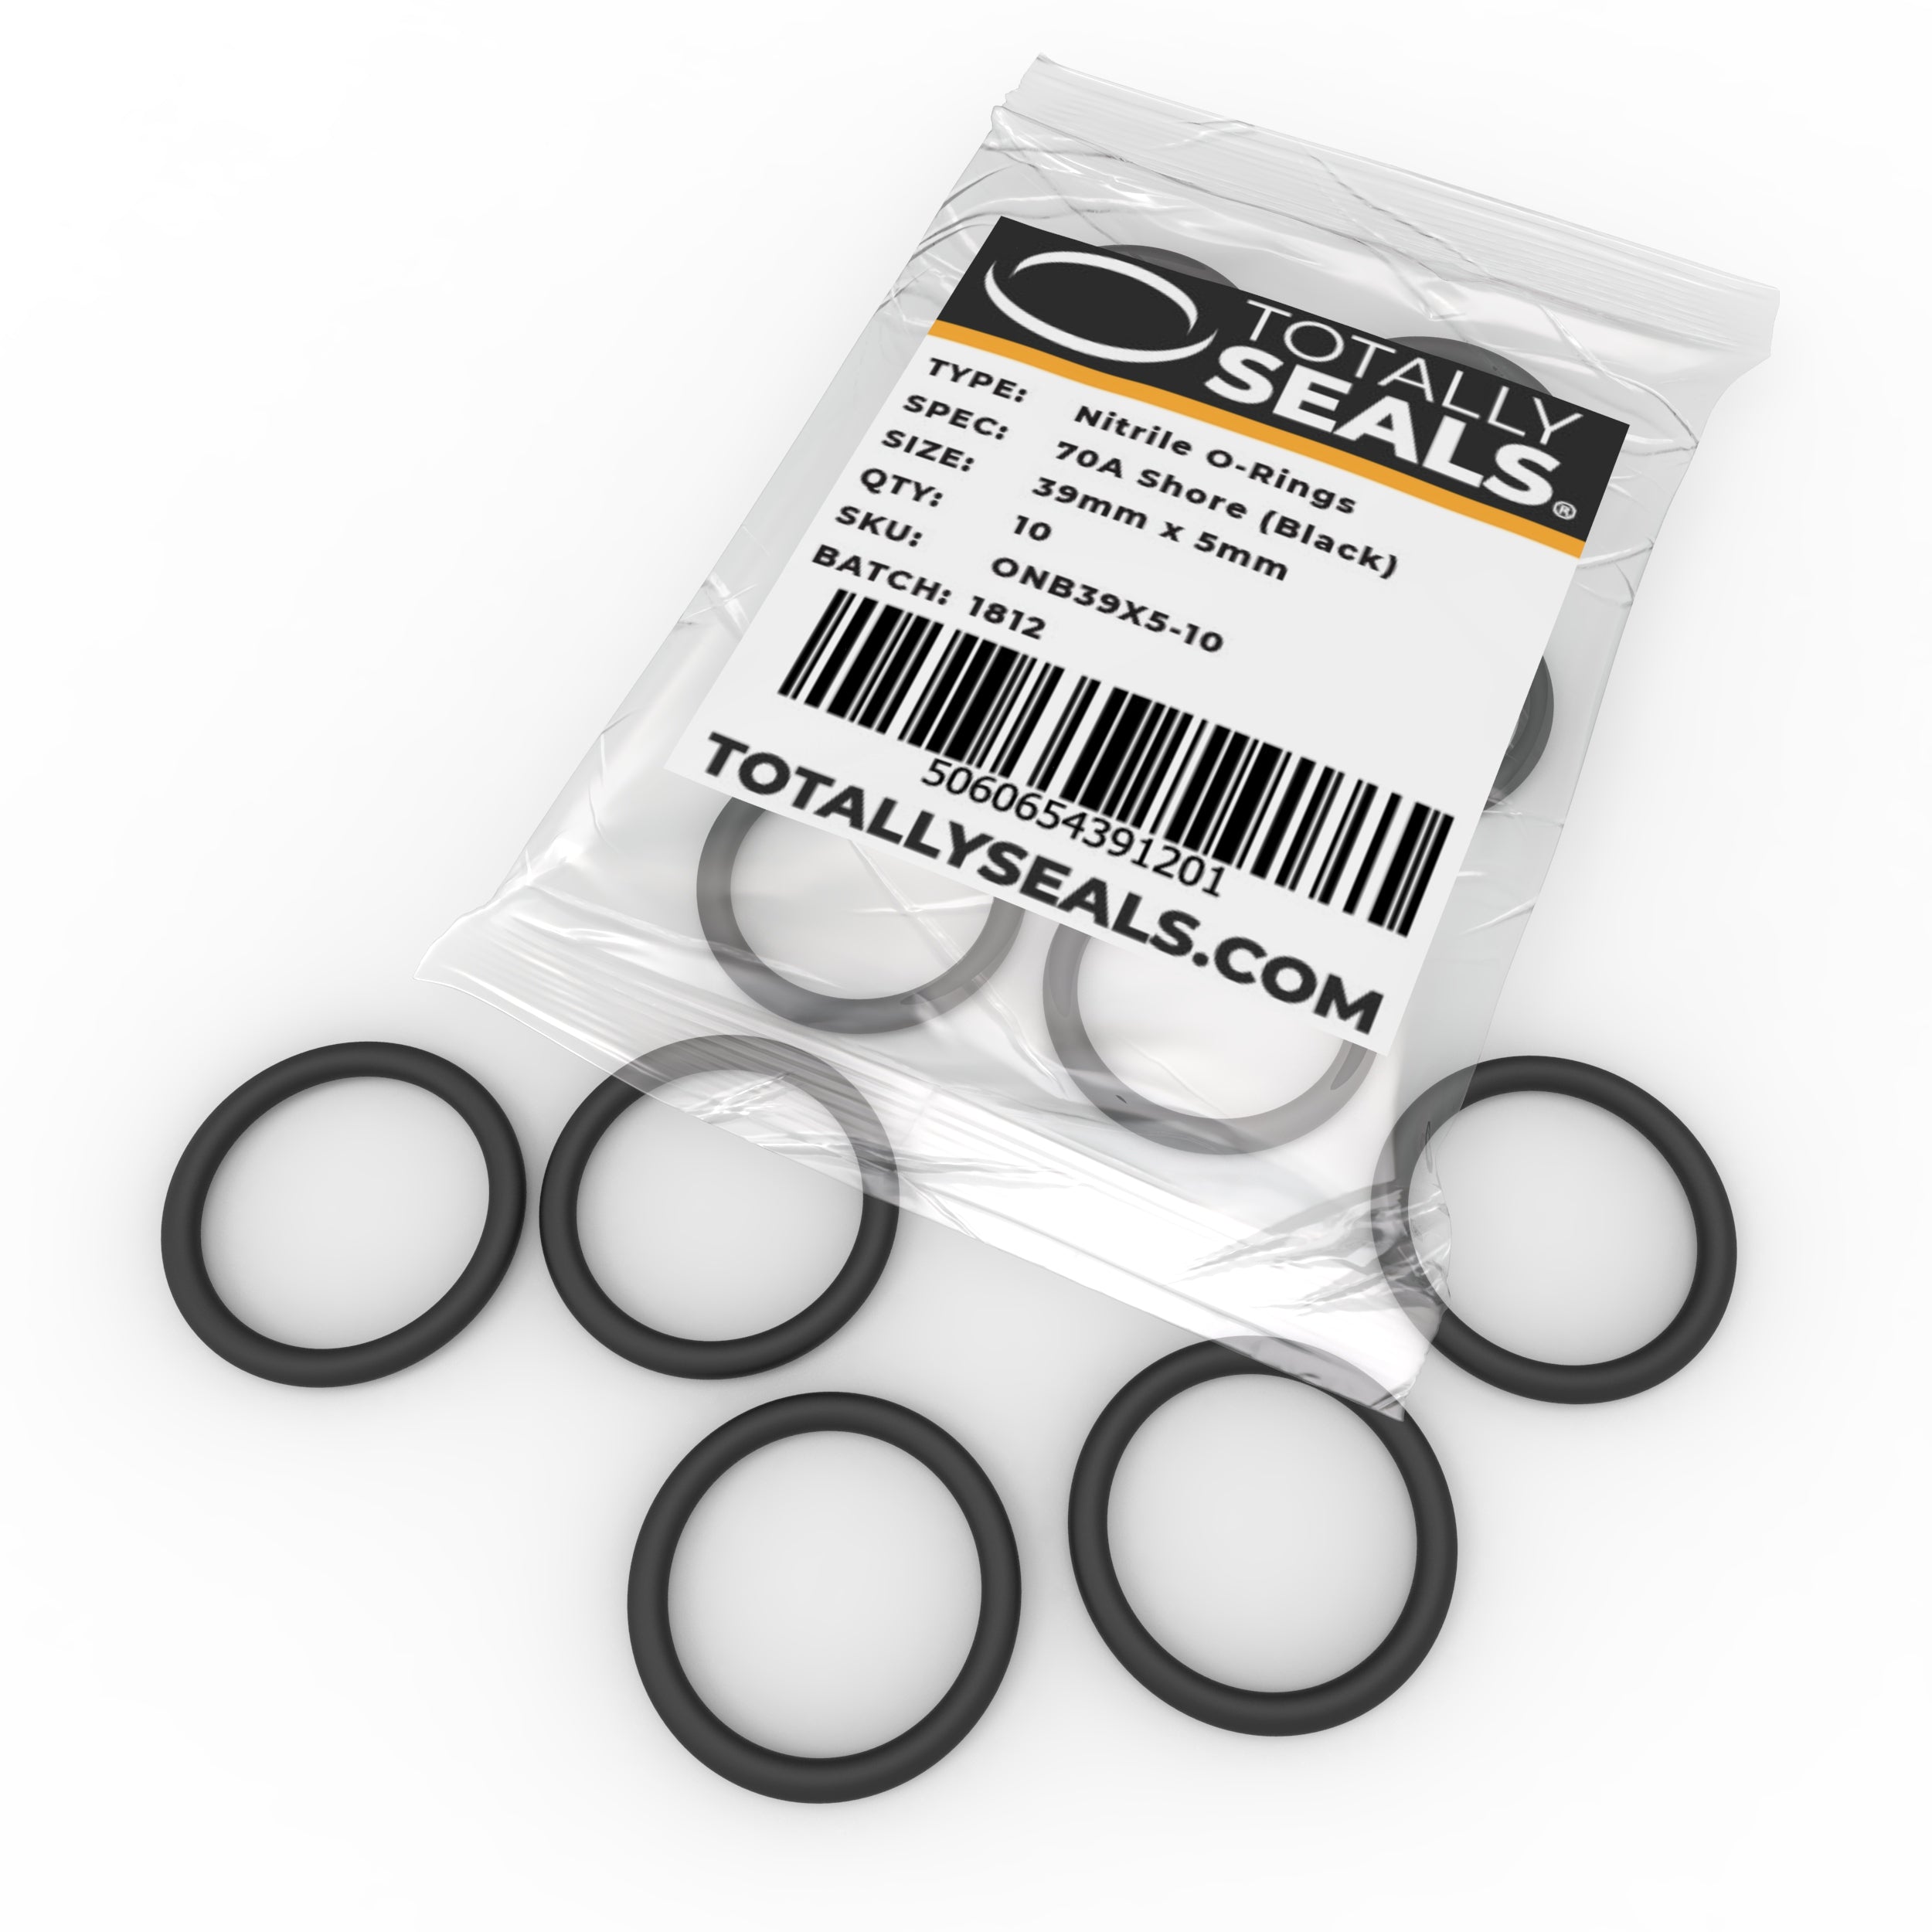 Silicone O-rings 50 x 5mm Price for 1 pc - OringsandMore